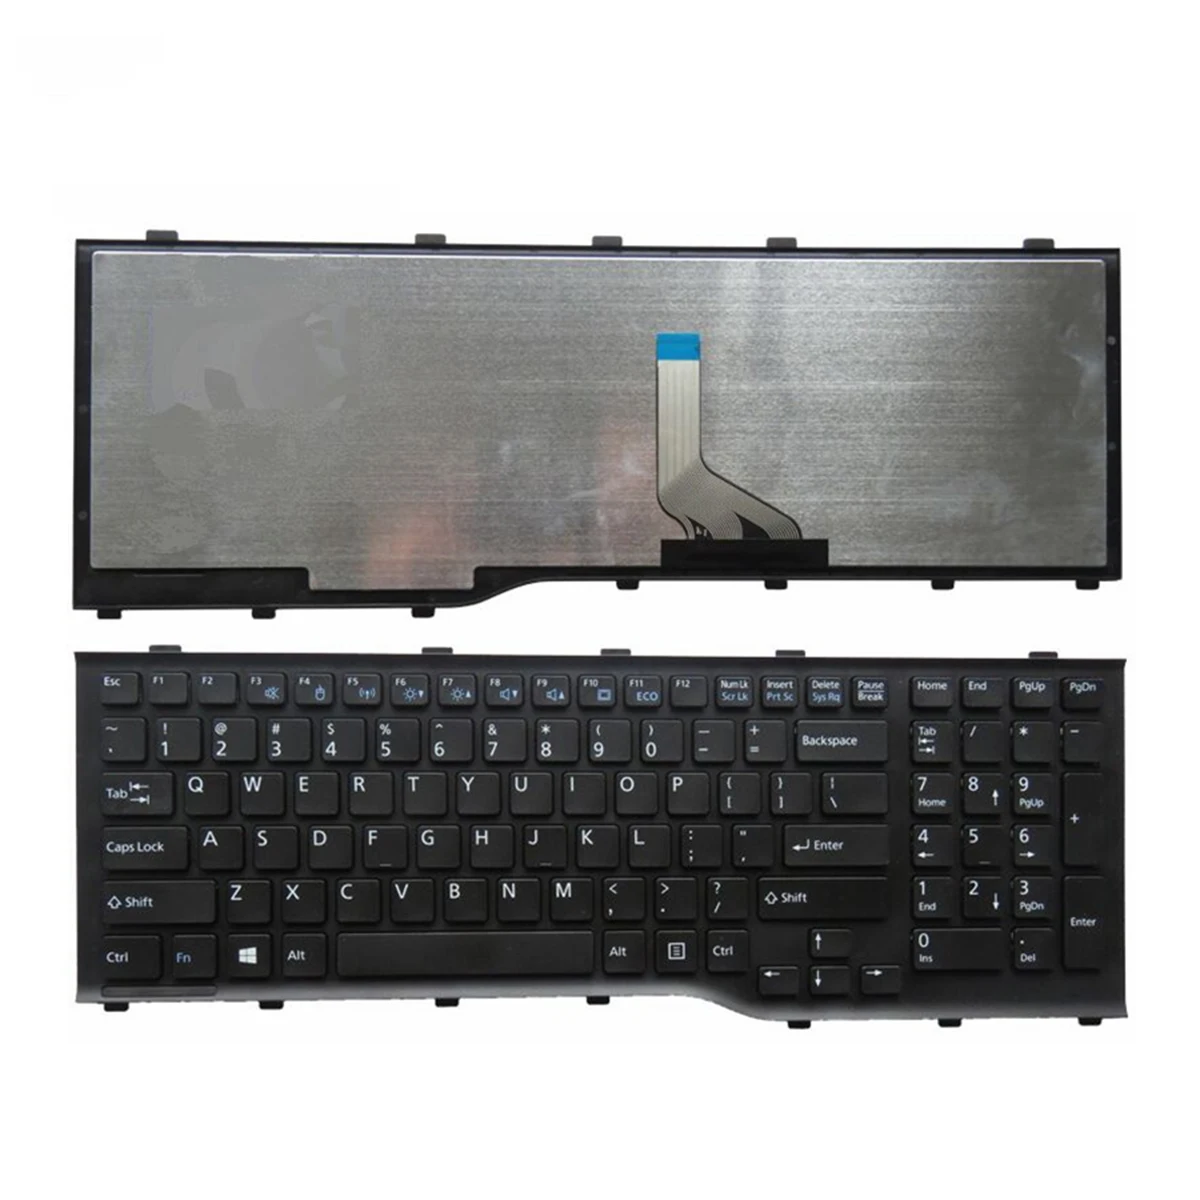 

new US Laptop Keyboard For FUJITSU Lifebook AH532 A532 N532 NH532 PN:MP-11L63US-D85 Notebook Replacement english keyboard